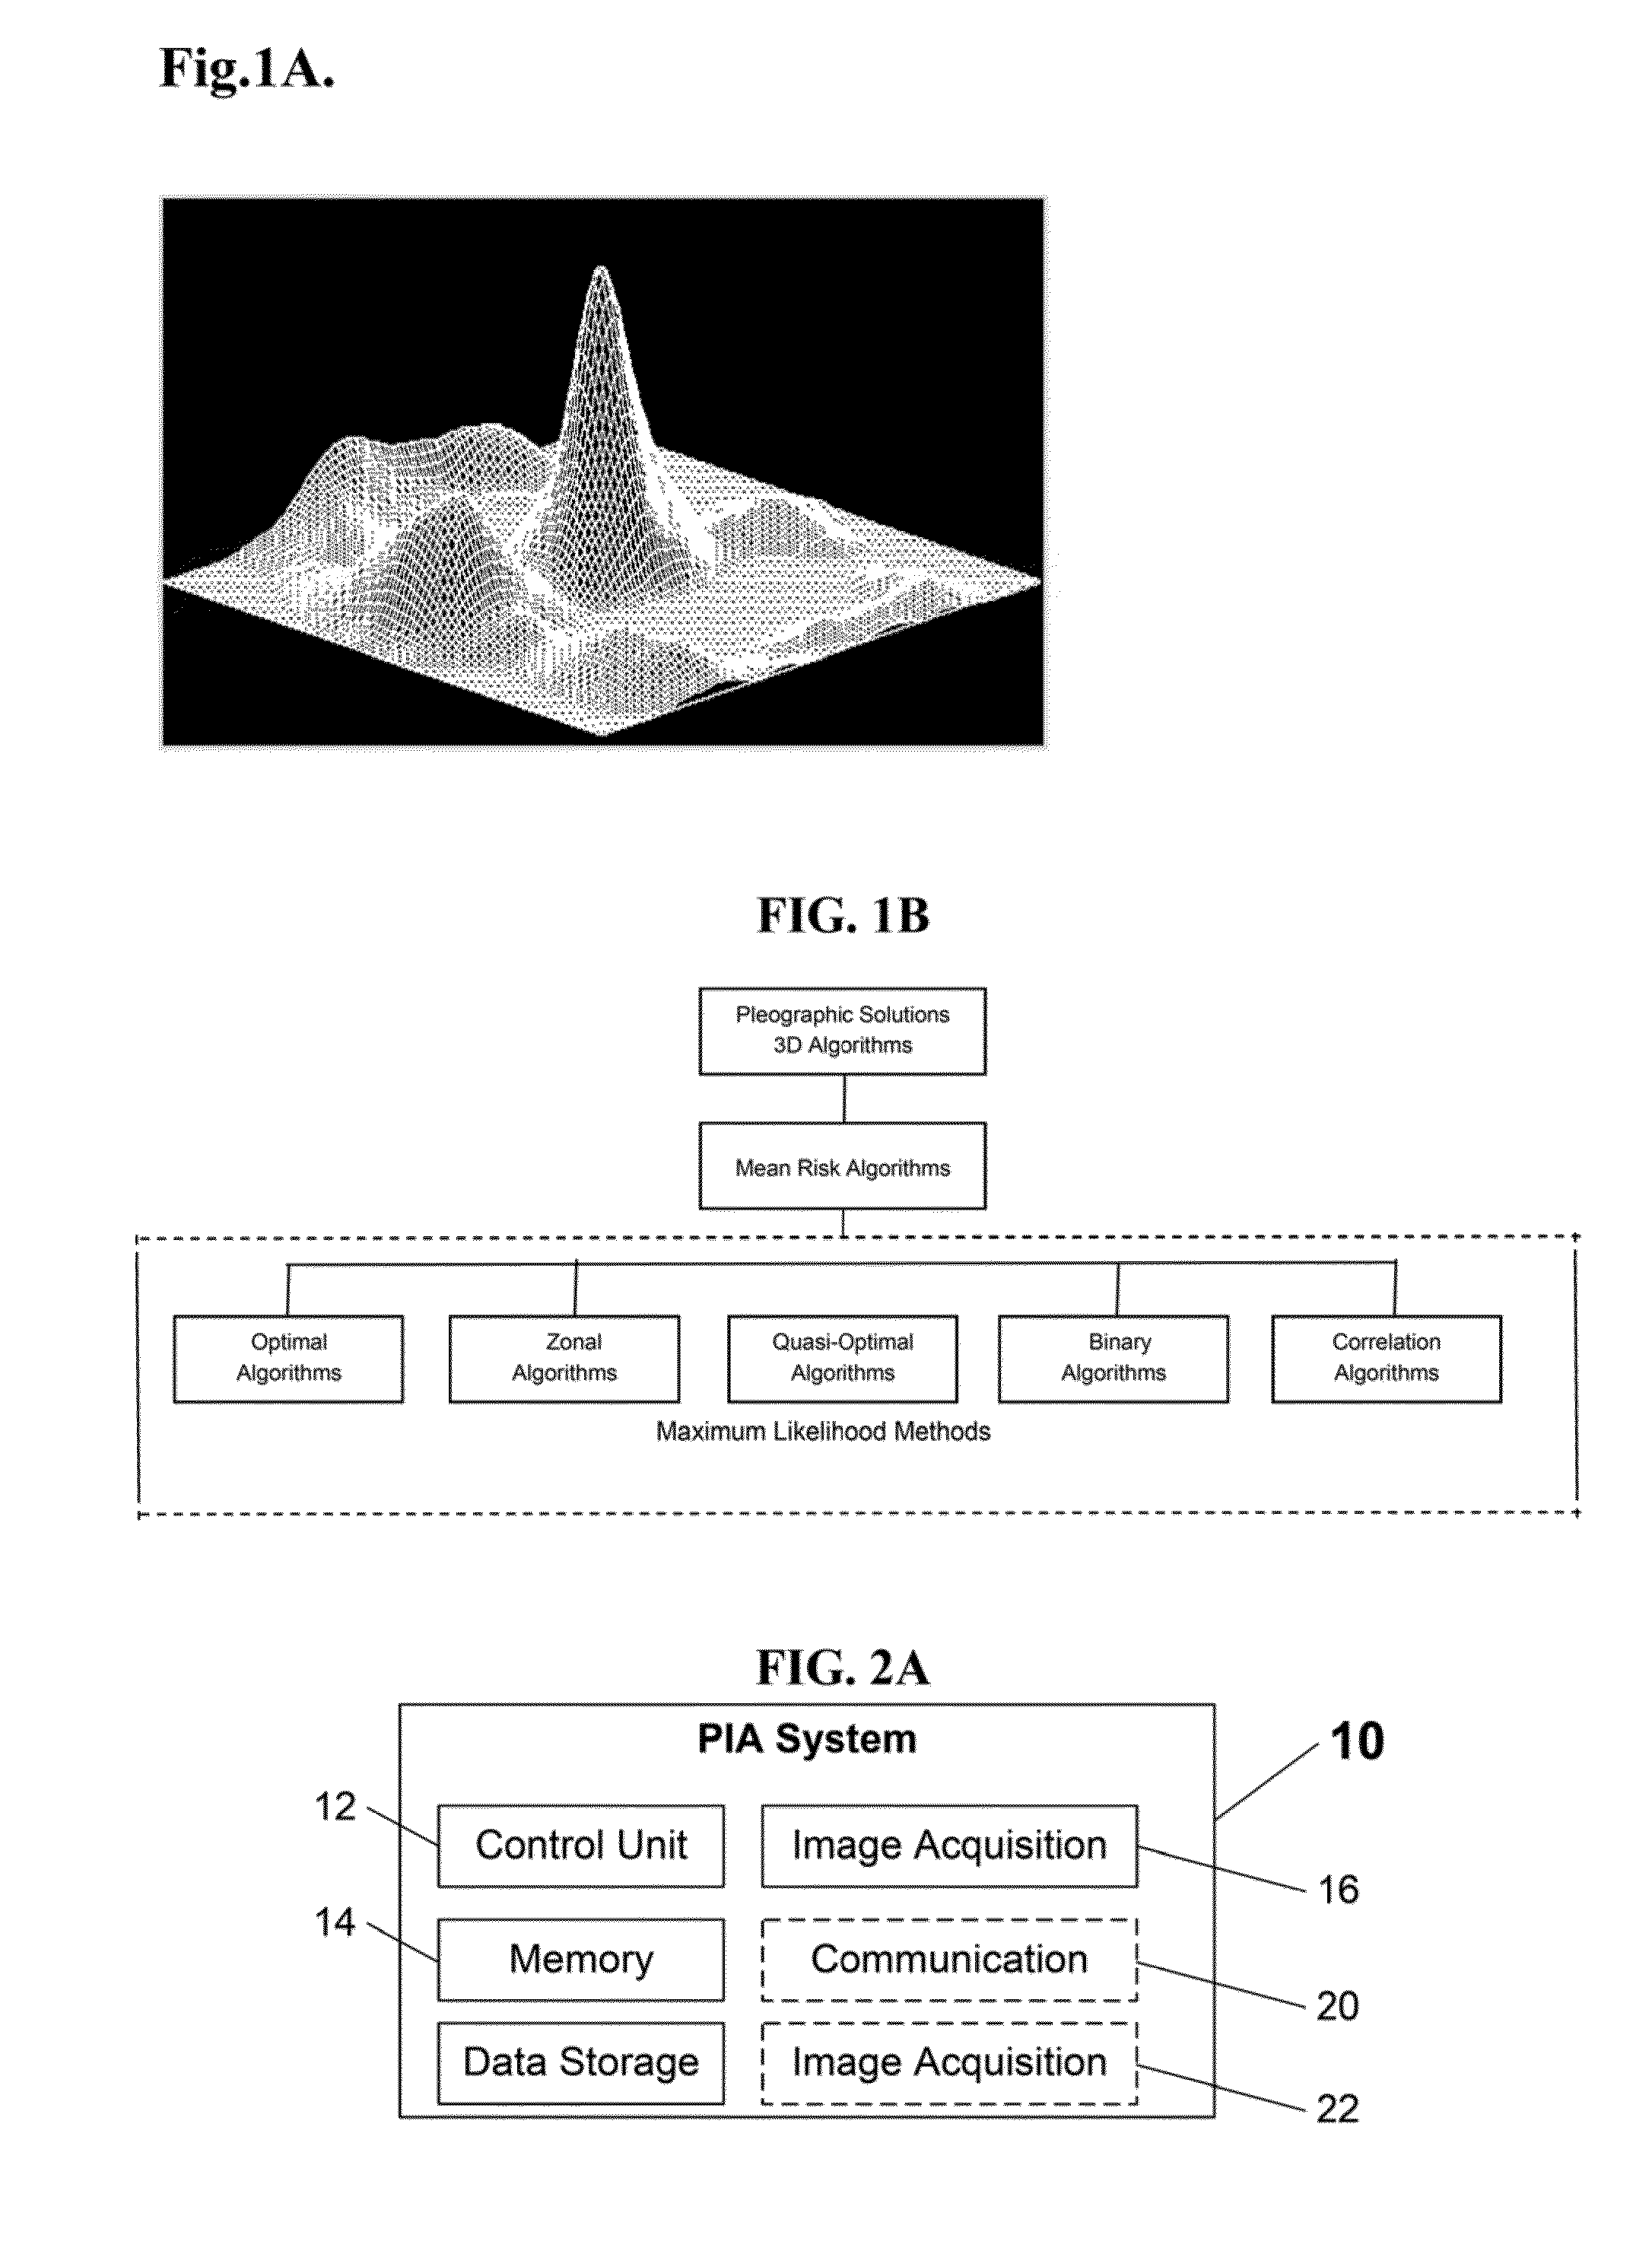 System and method for pleographic recognition, matching, and identification of images and objects